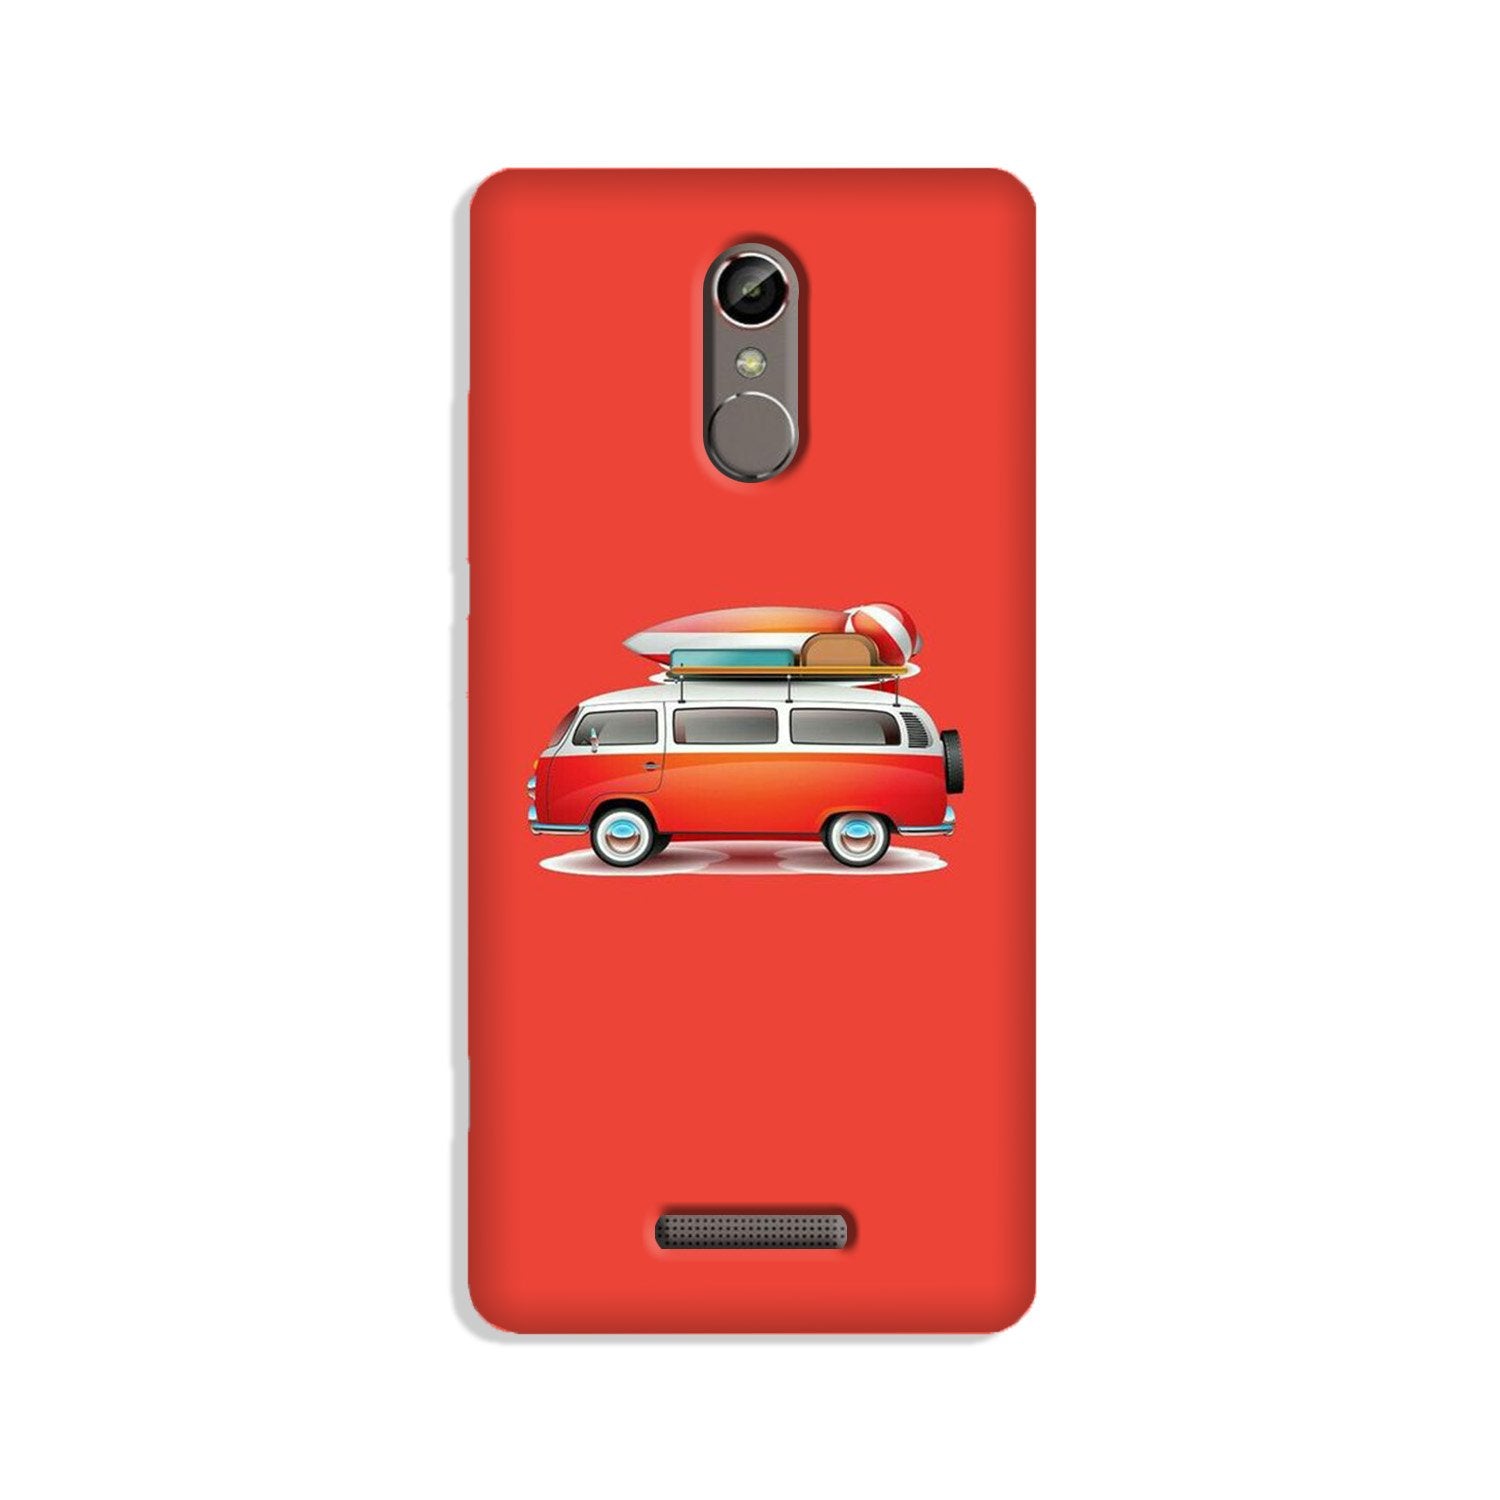 Travel Bus Case for Gionee S6s (Design No. 258)